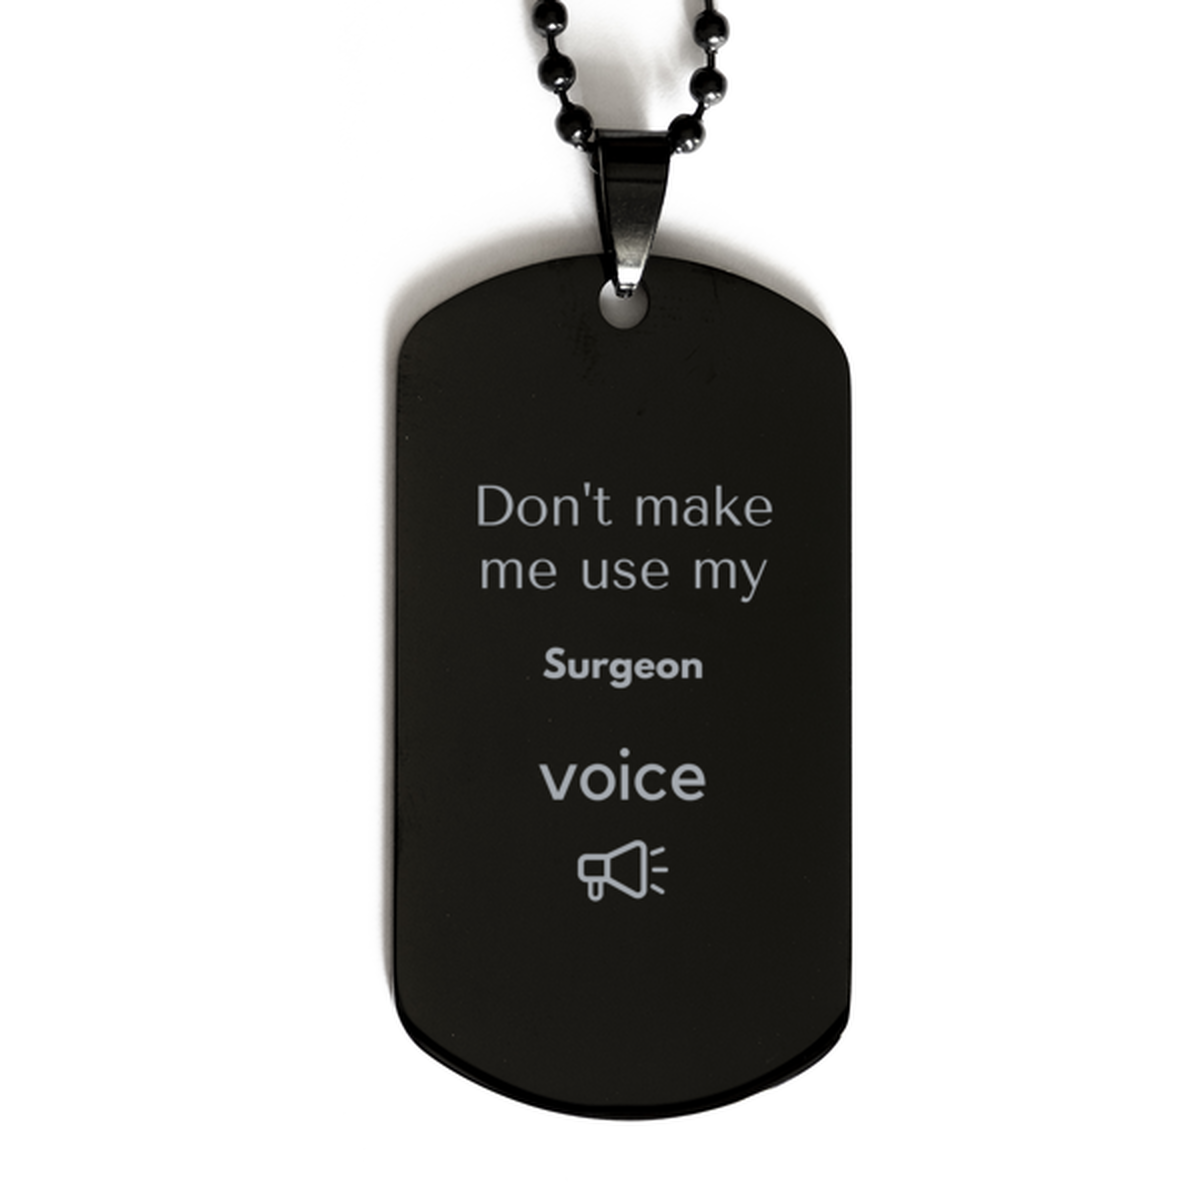 Don't make me use my Surgeon voice, Sarcasm Surgeon Gifts, Christmas Surgeon Black Dog Tag Birthday Unique Gifts For Surgeon Coworkers, Men, Women, Colleague, Friends